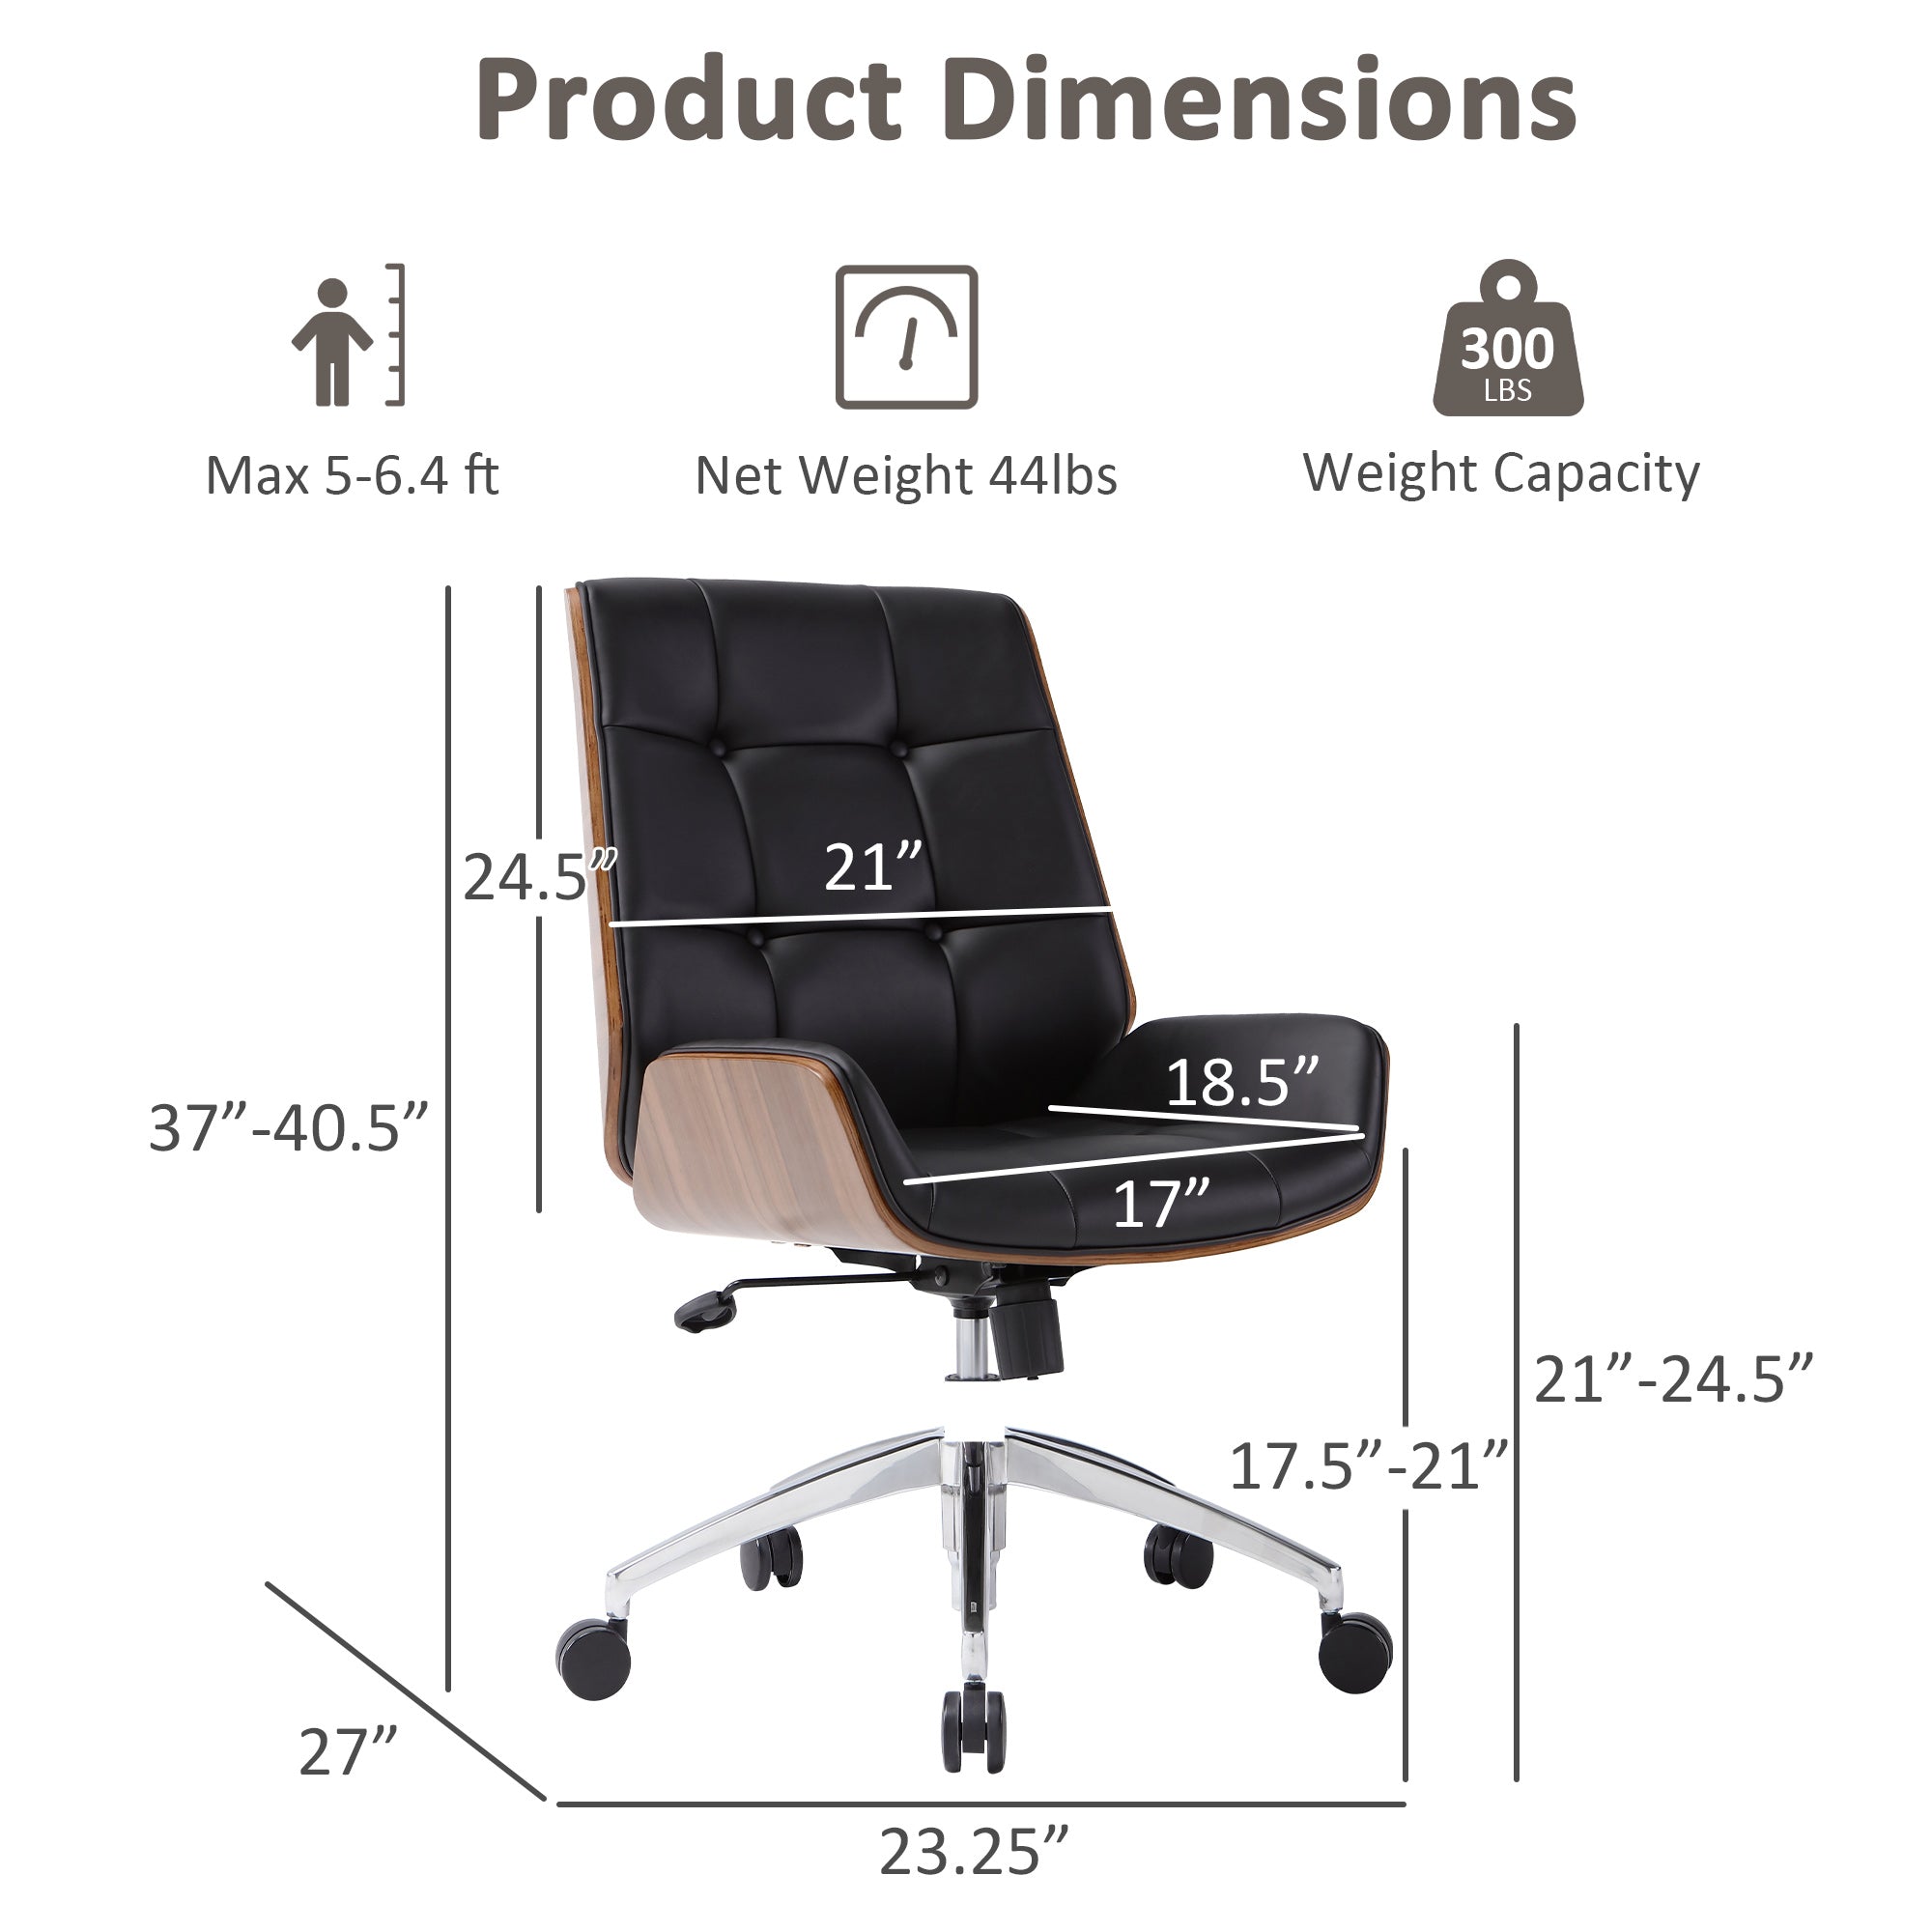 Executive Ergonomic Office Leather Chairs with Tilt and Height Adjustable, Black